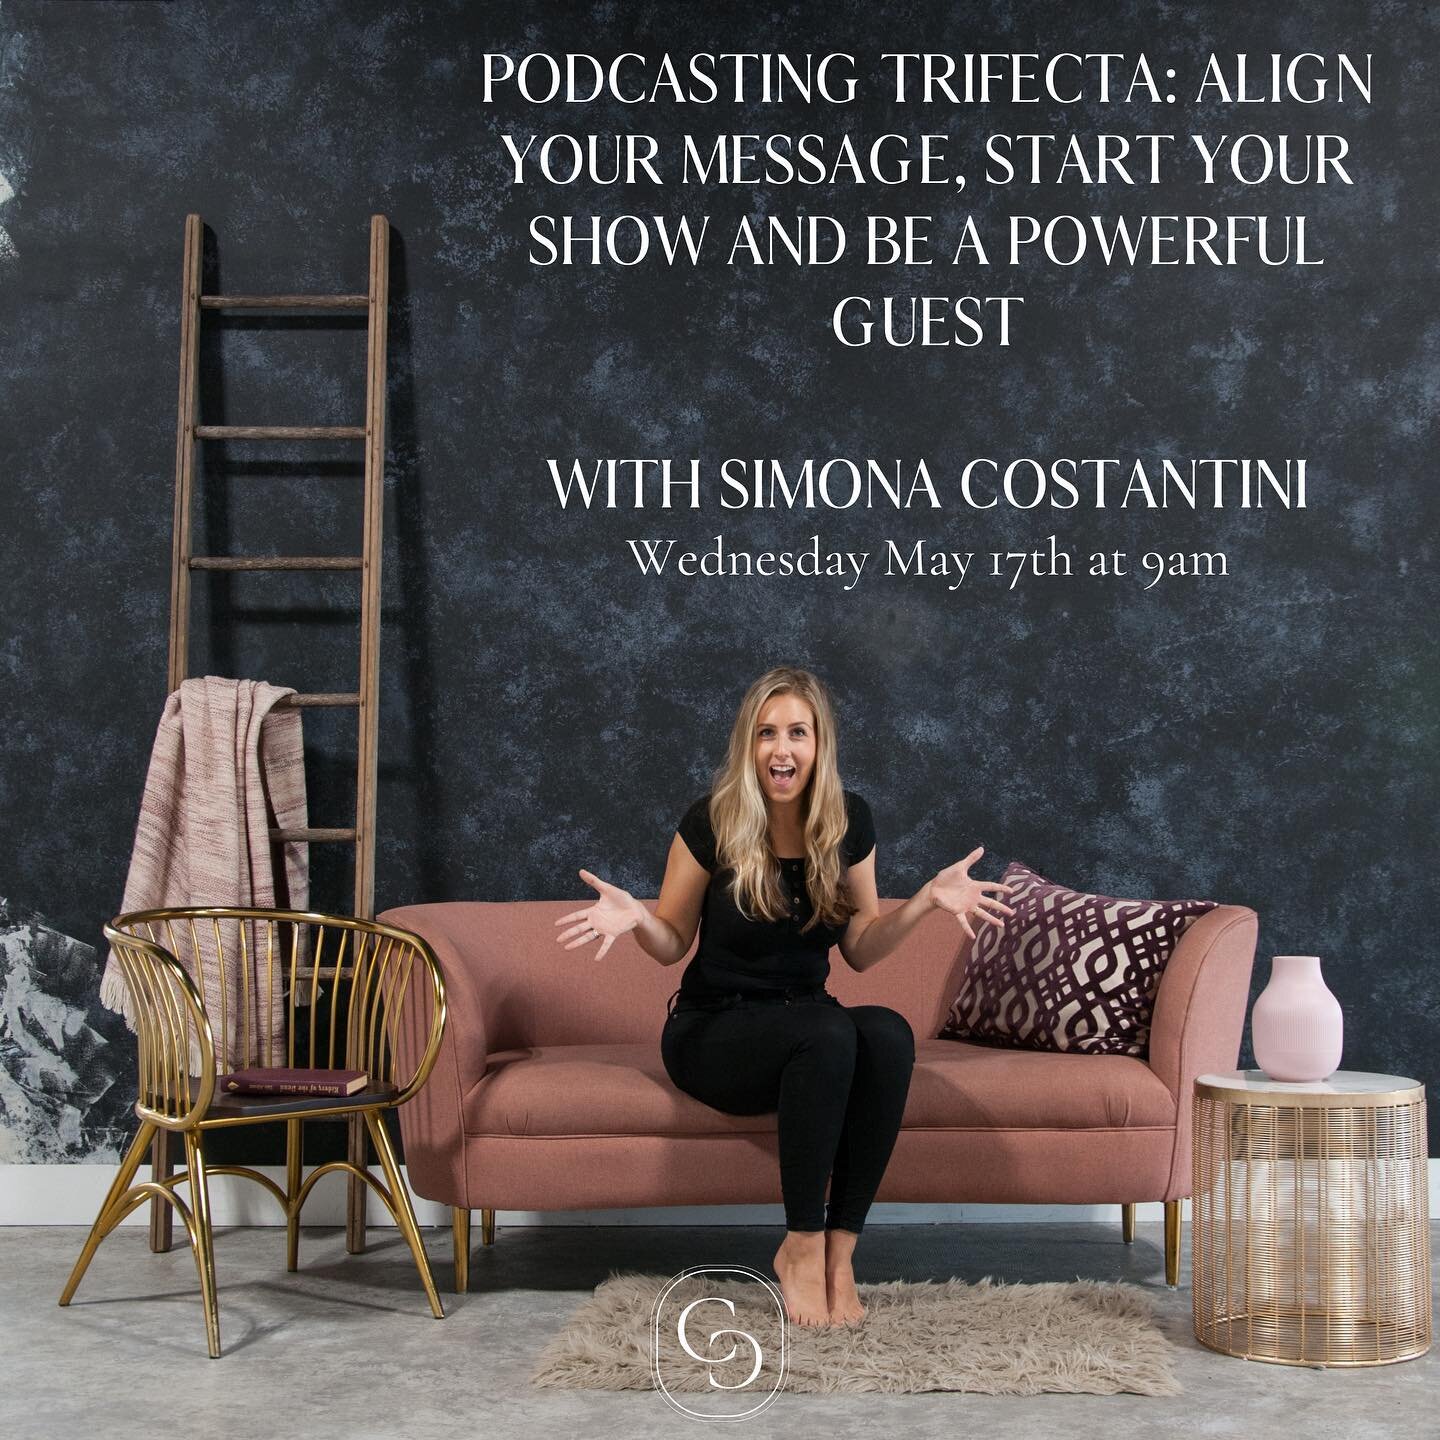 VIRTUAL WORKSHOP NEXT WEDNESDAY!

Join us virtually Wednesday May 17th at 9am as we dive into all things podcasting with our dear friend @simona__costantini 🎙️

Simona is the Founder and CEO of Costantini Productions, a full-service podcast producti